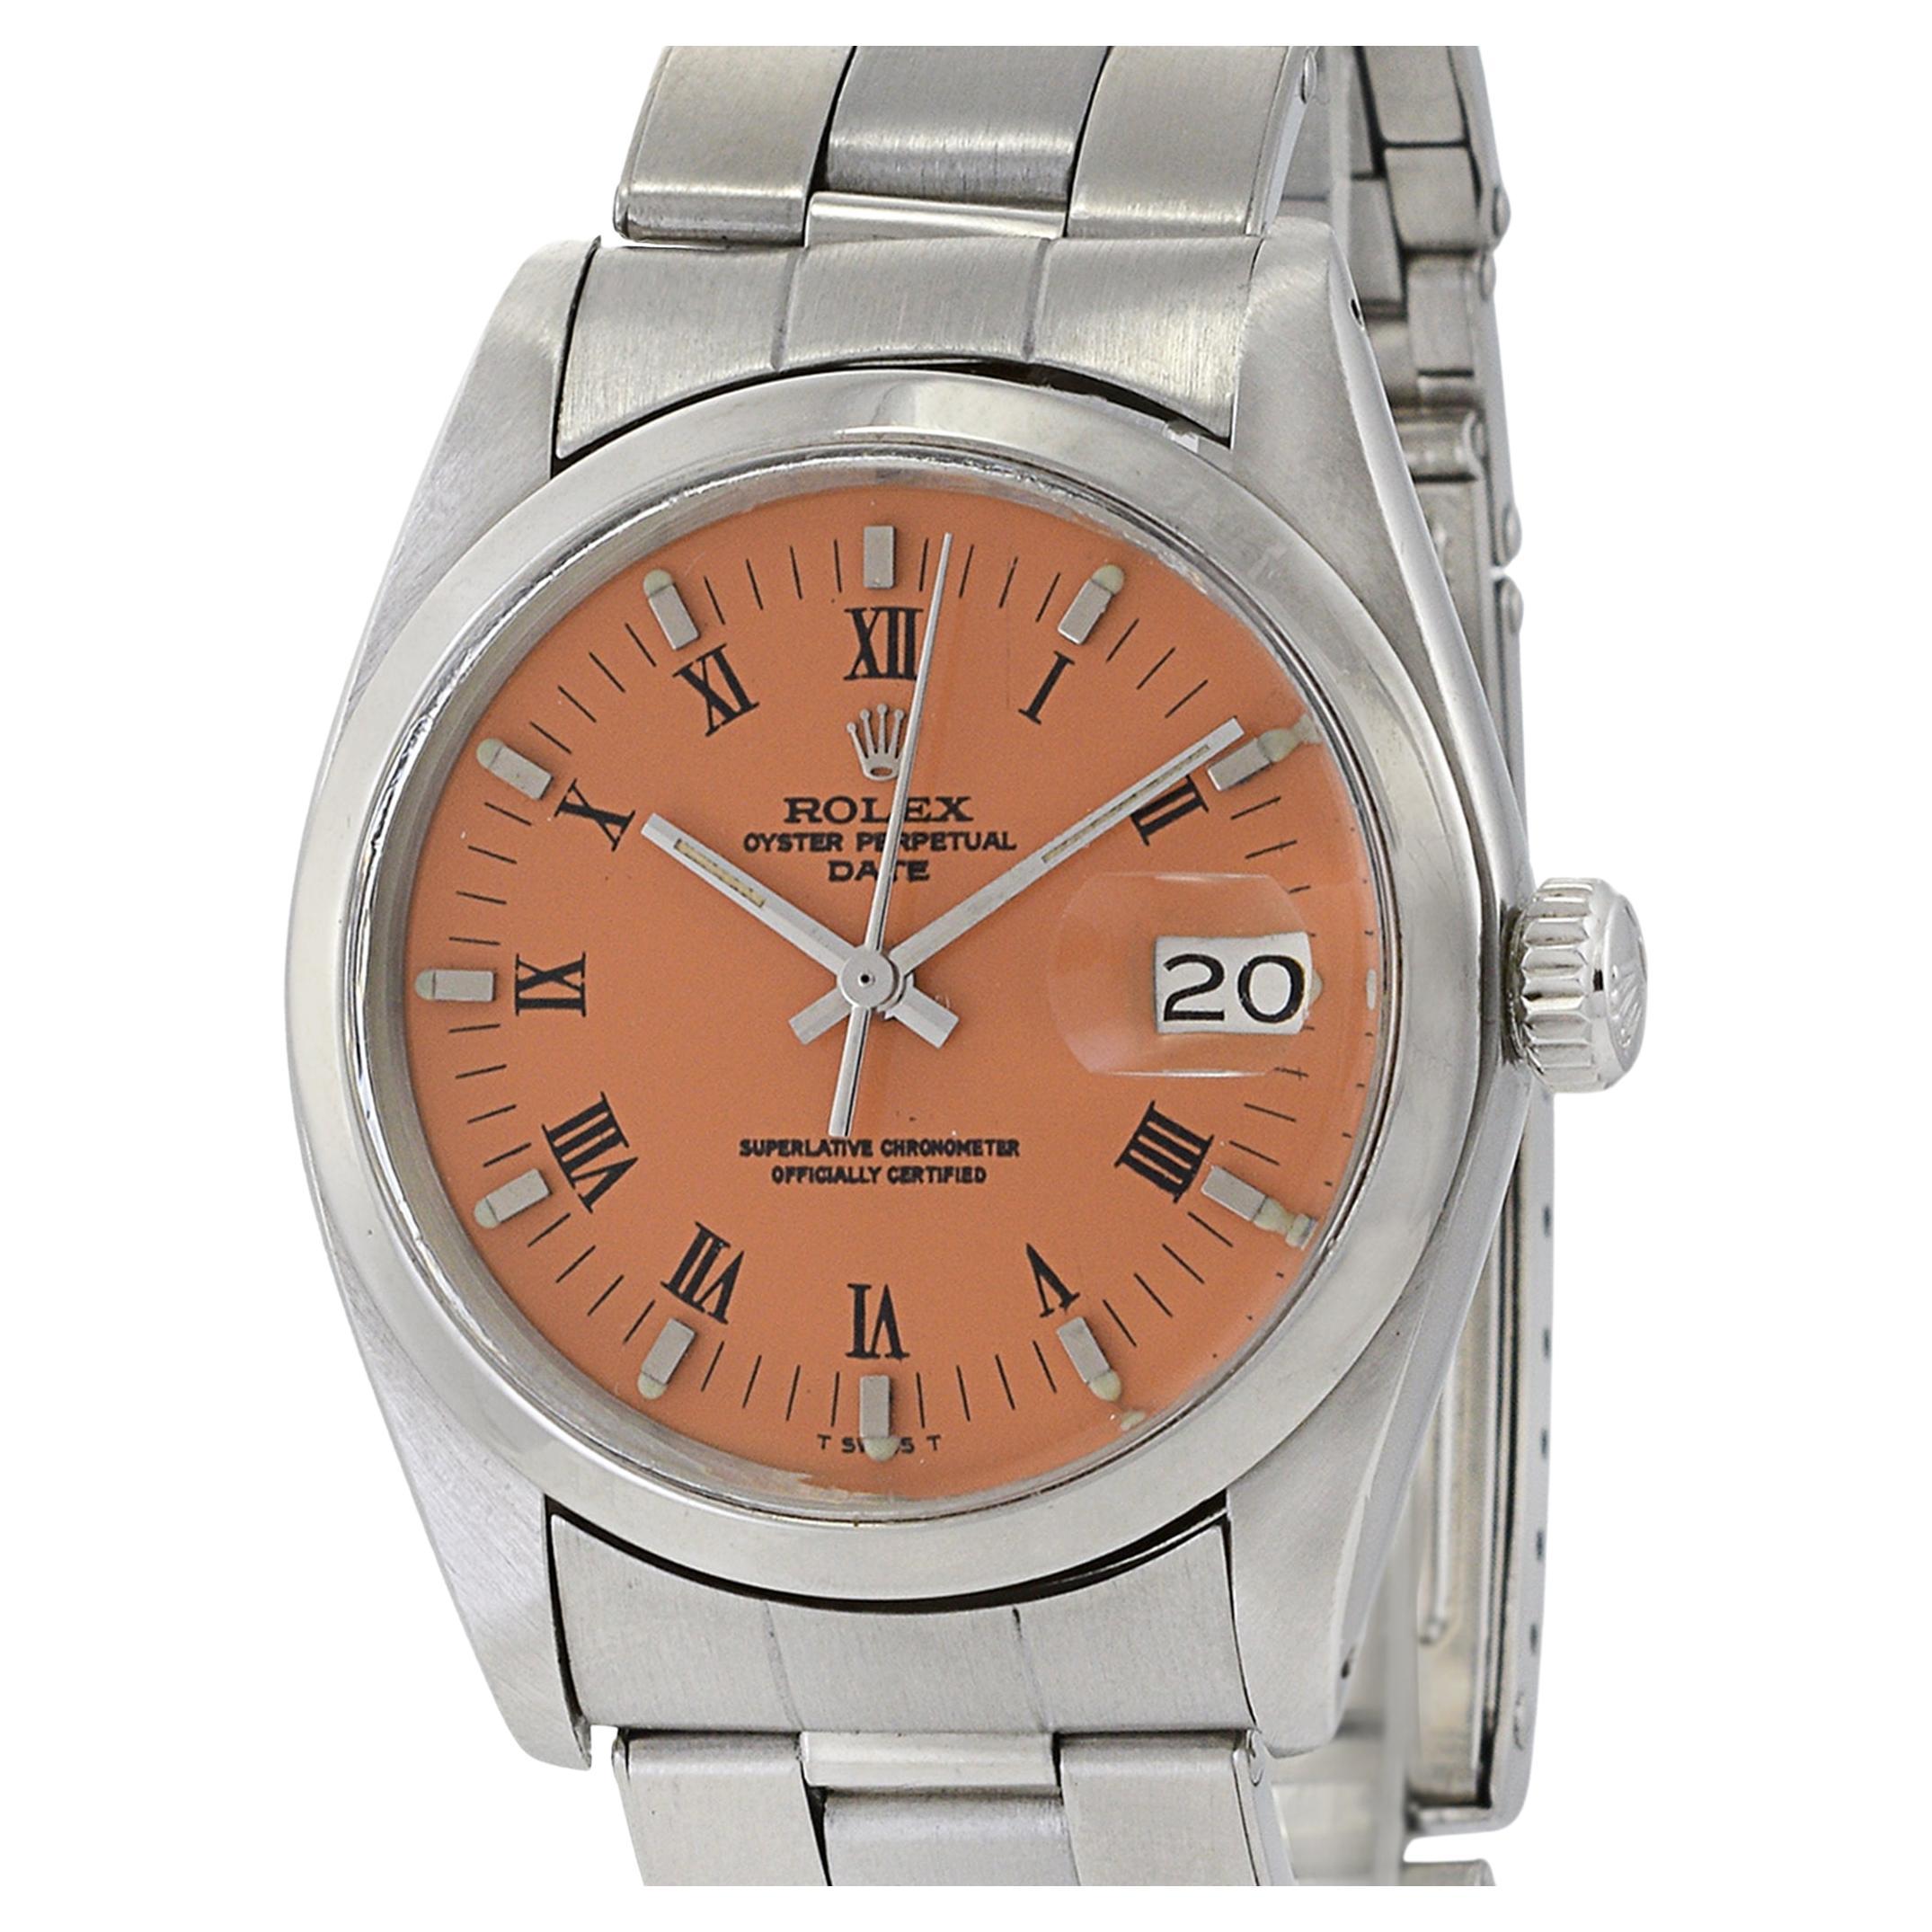 Rolex Oyster Perpetual Date Referenz 1500